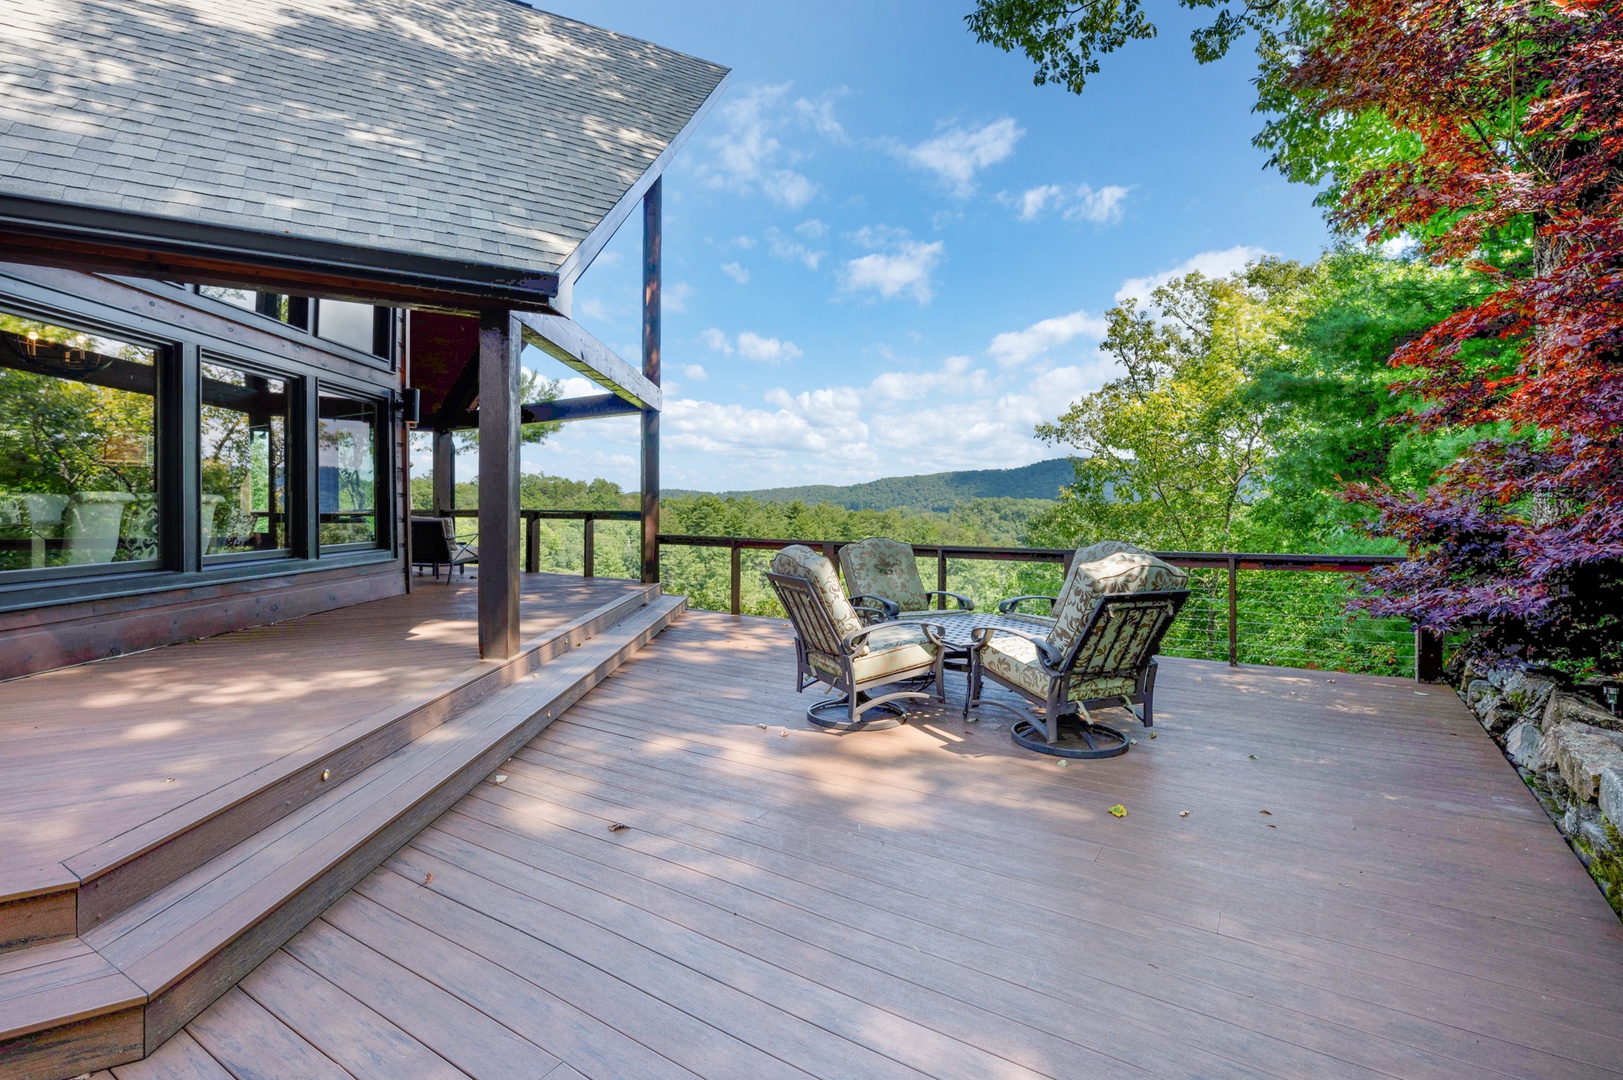 Kricket's Overlook- Entry level open area deck seating with mountain views